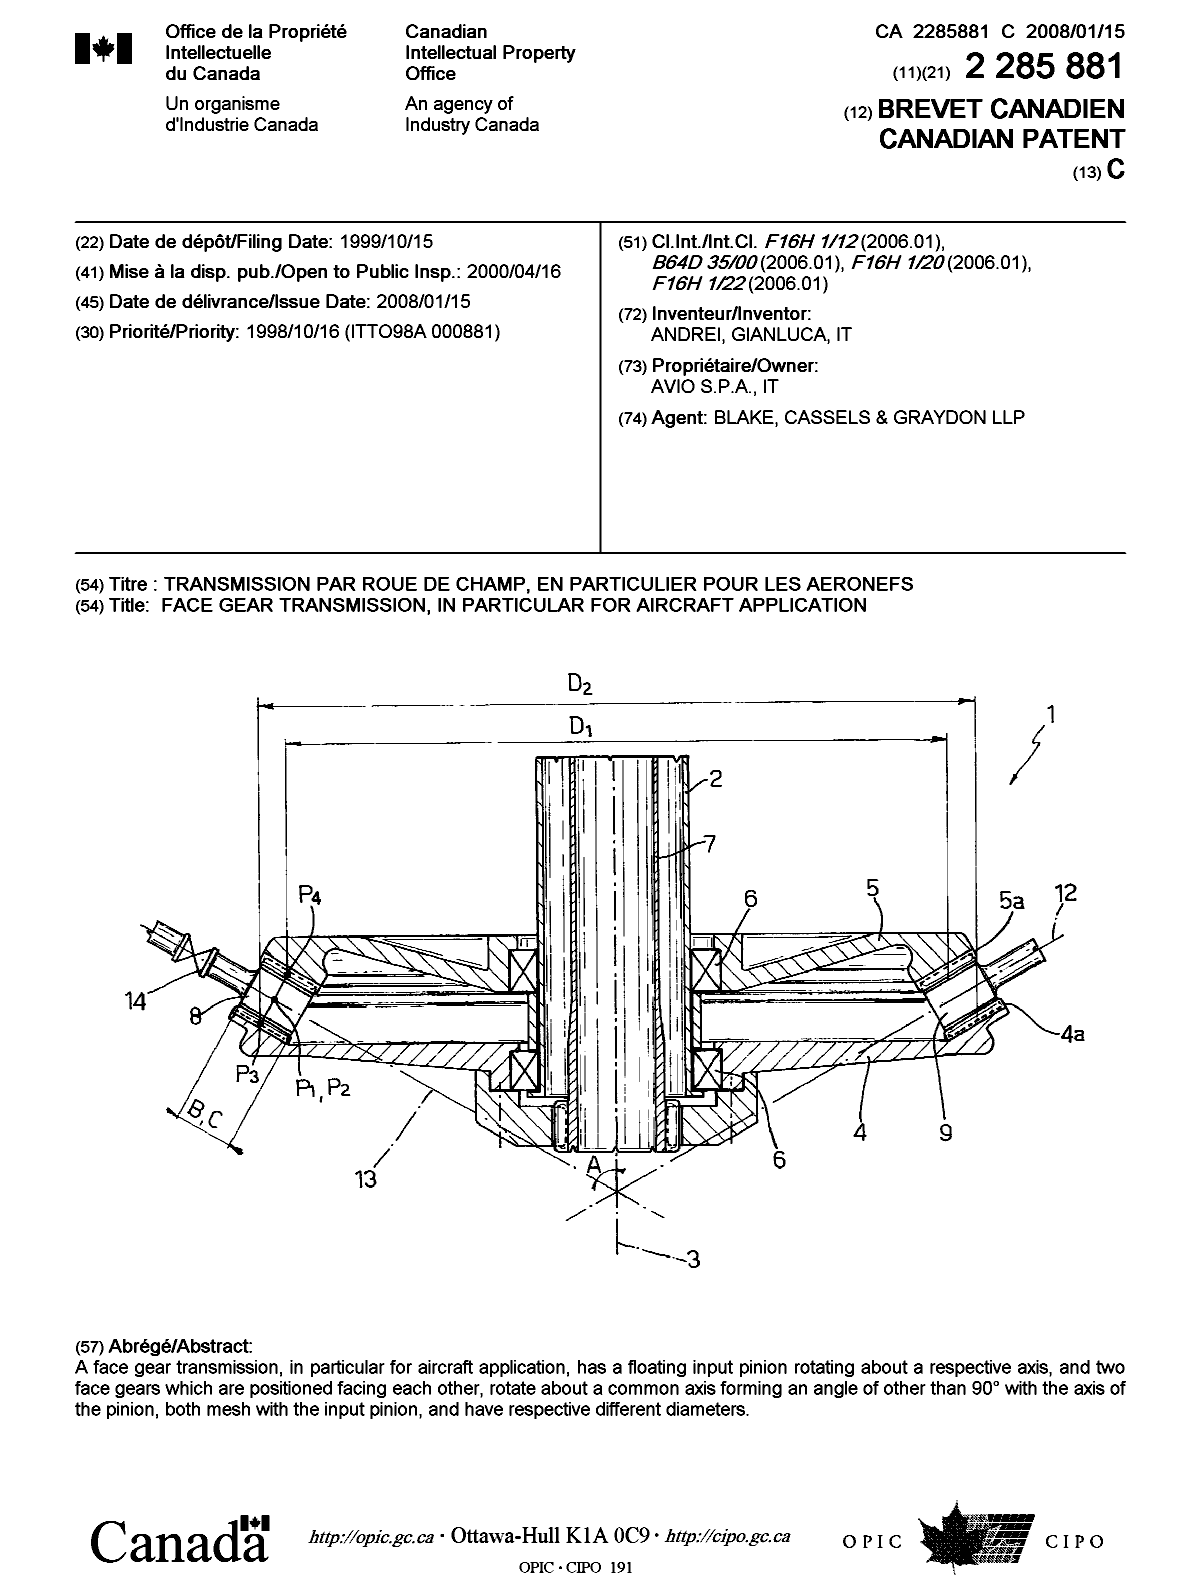 Canadian Patent Document 2285881. Cover Page 20071211. Image 1 of 1